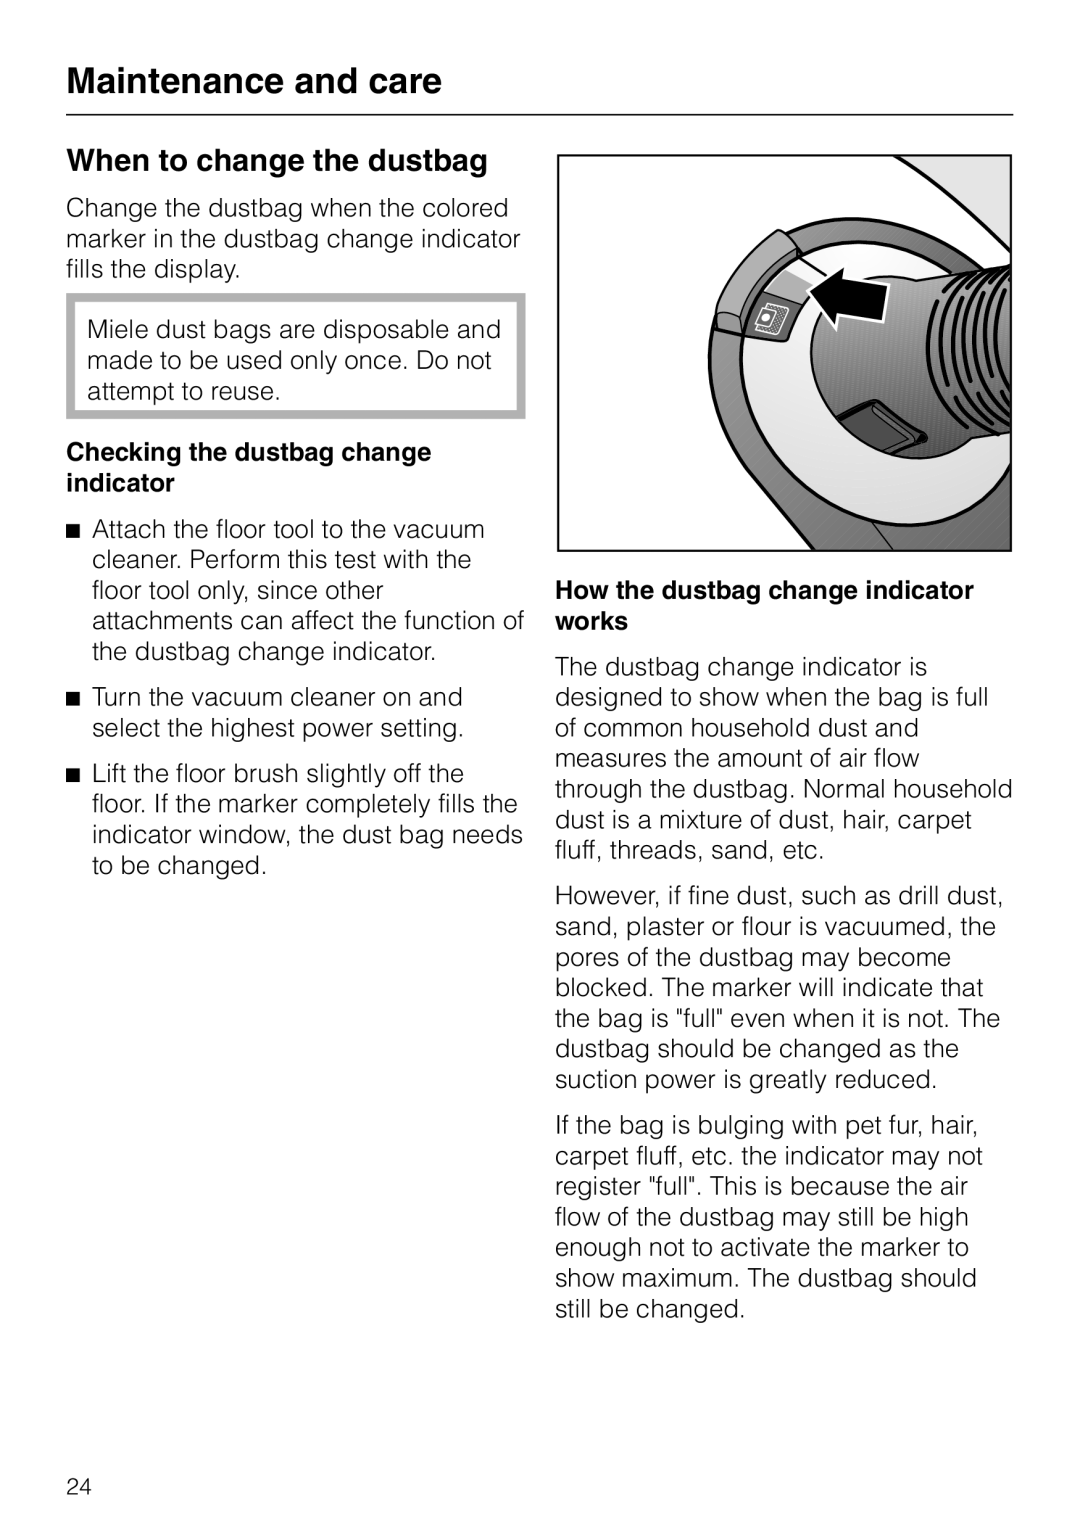 Miele S 5000 operating instructions When to change the dustbag, Maintenance and care, Checking the dustbag change indicator 